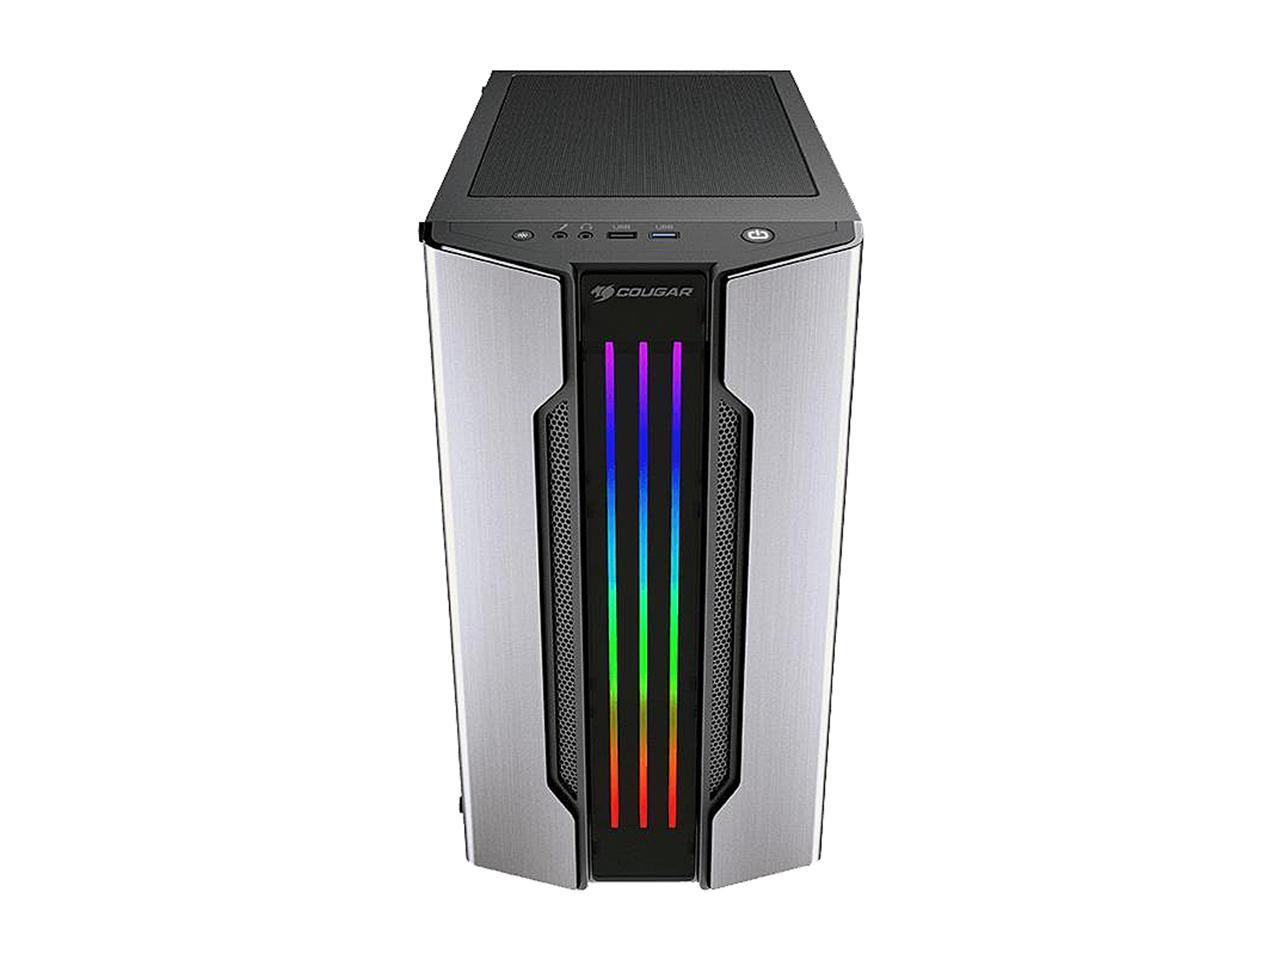 COUGAR Gemini M-Silver Silver Steel / Tempered Glass Mini Tower Computer Case w/ Integrated Trelux RGB Lighting